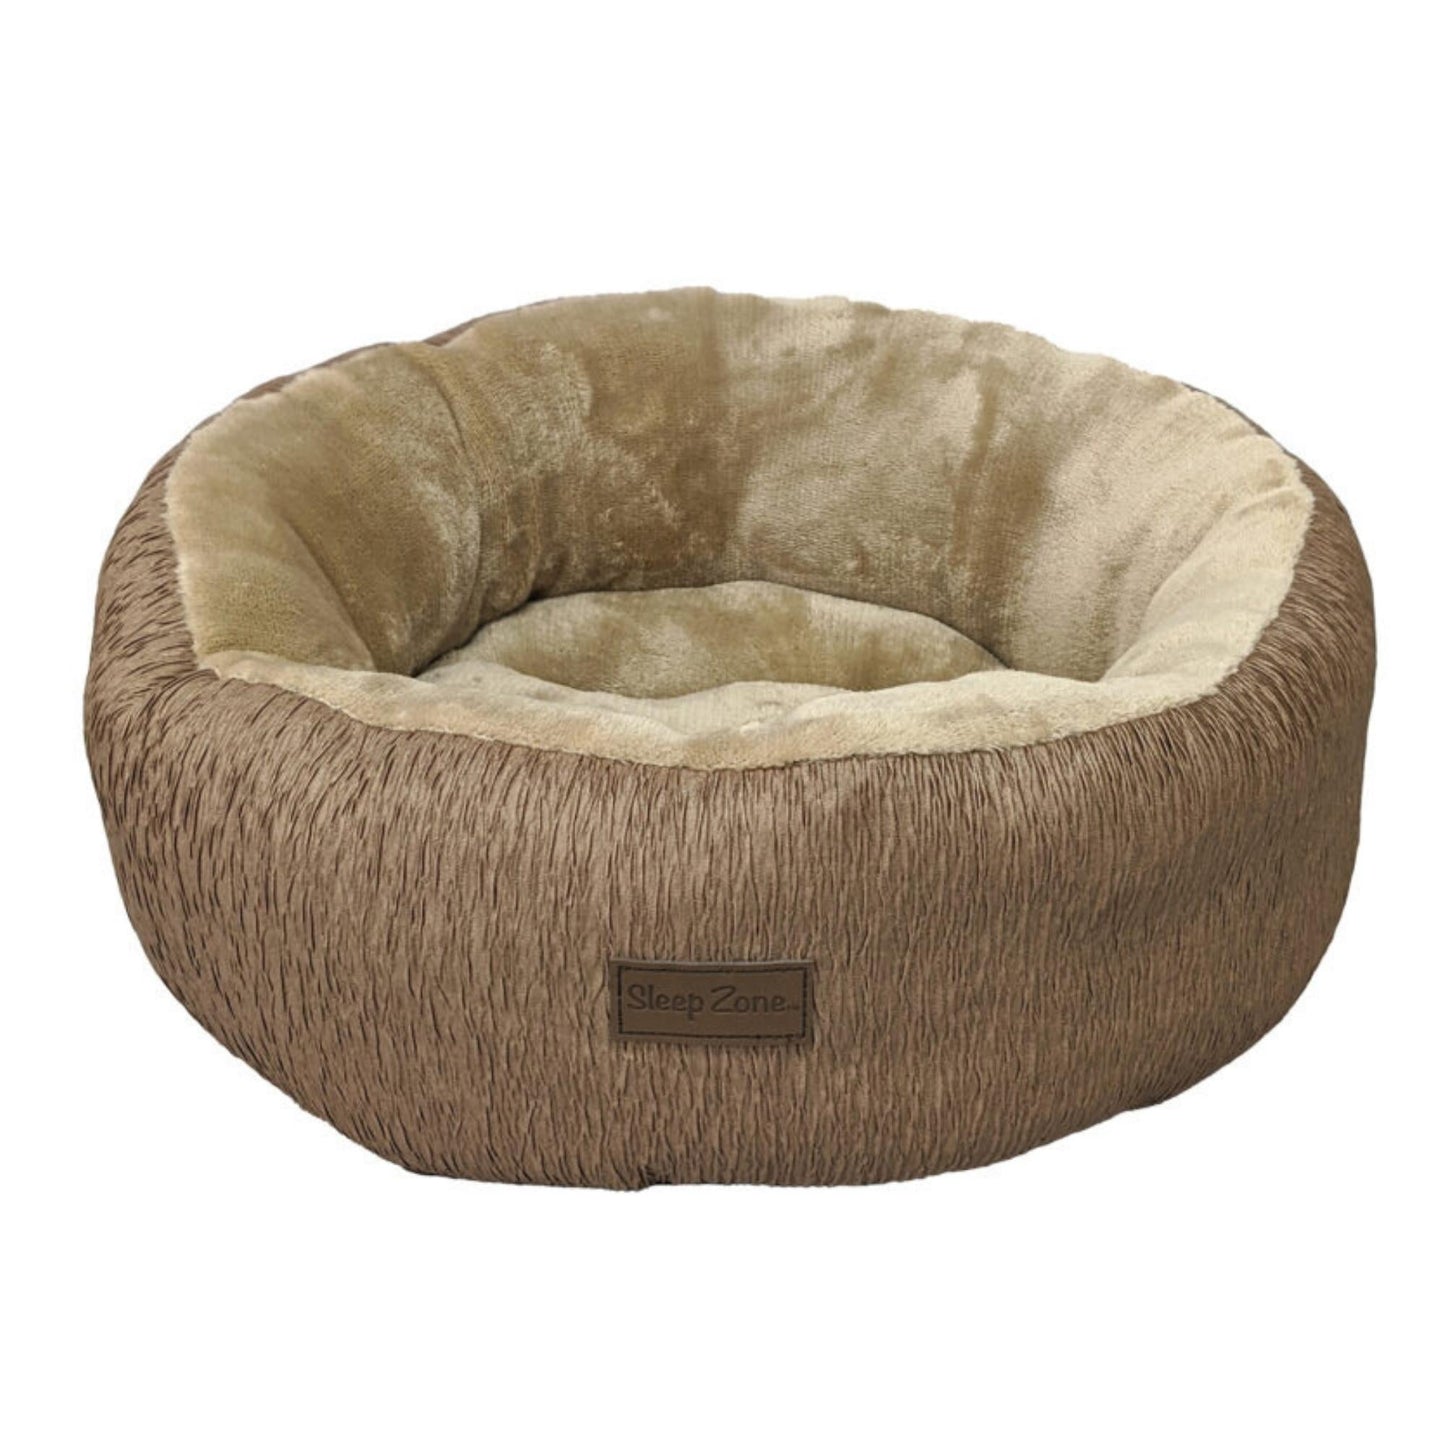 Ethical Pet Sleep Zone Wood Grain Round 18" Taupe